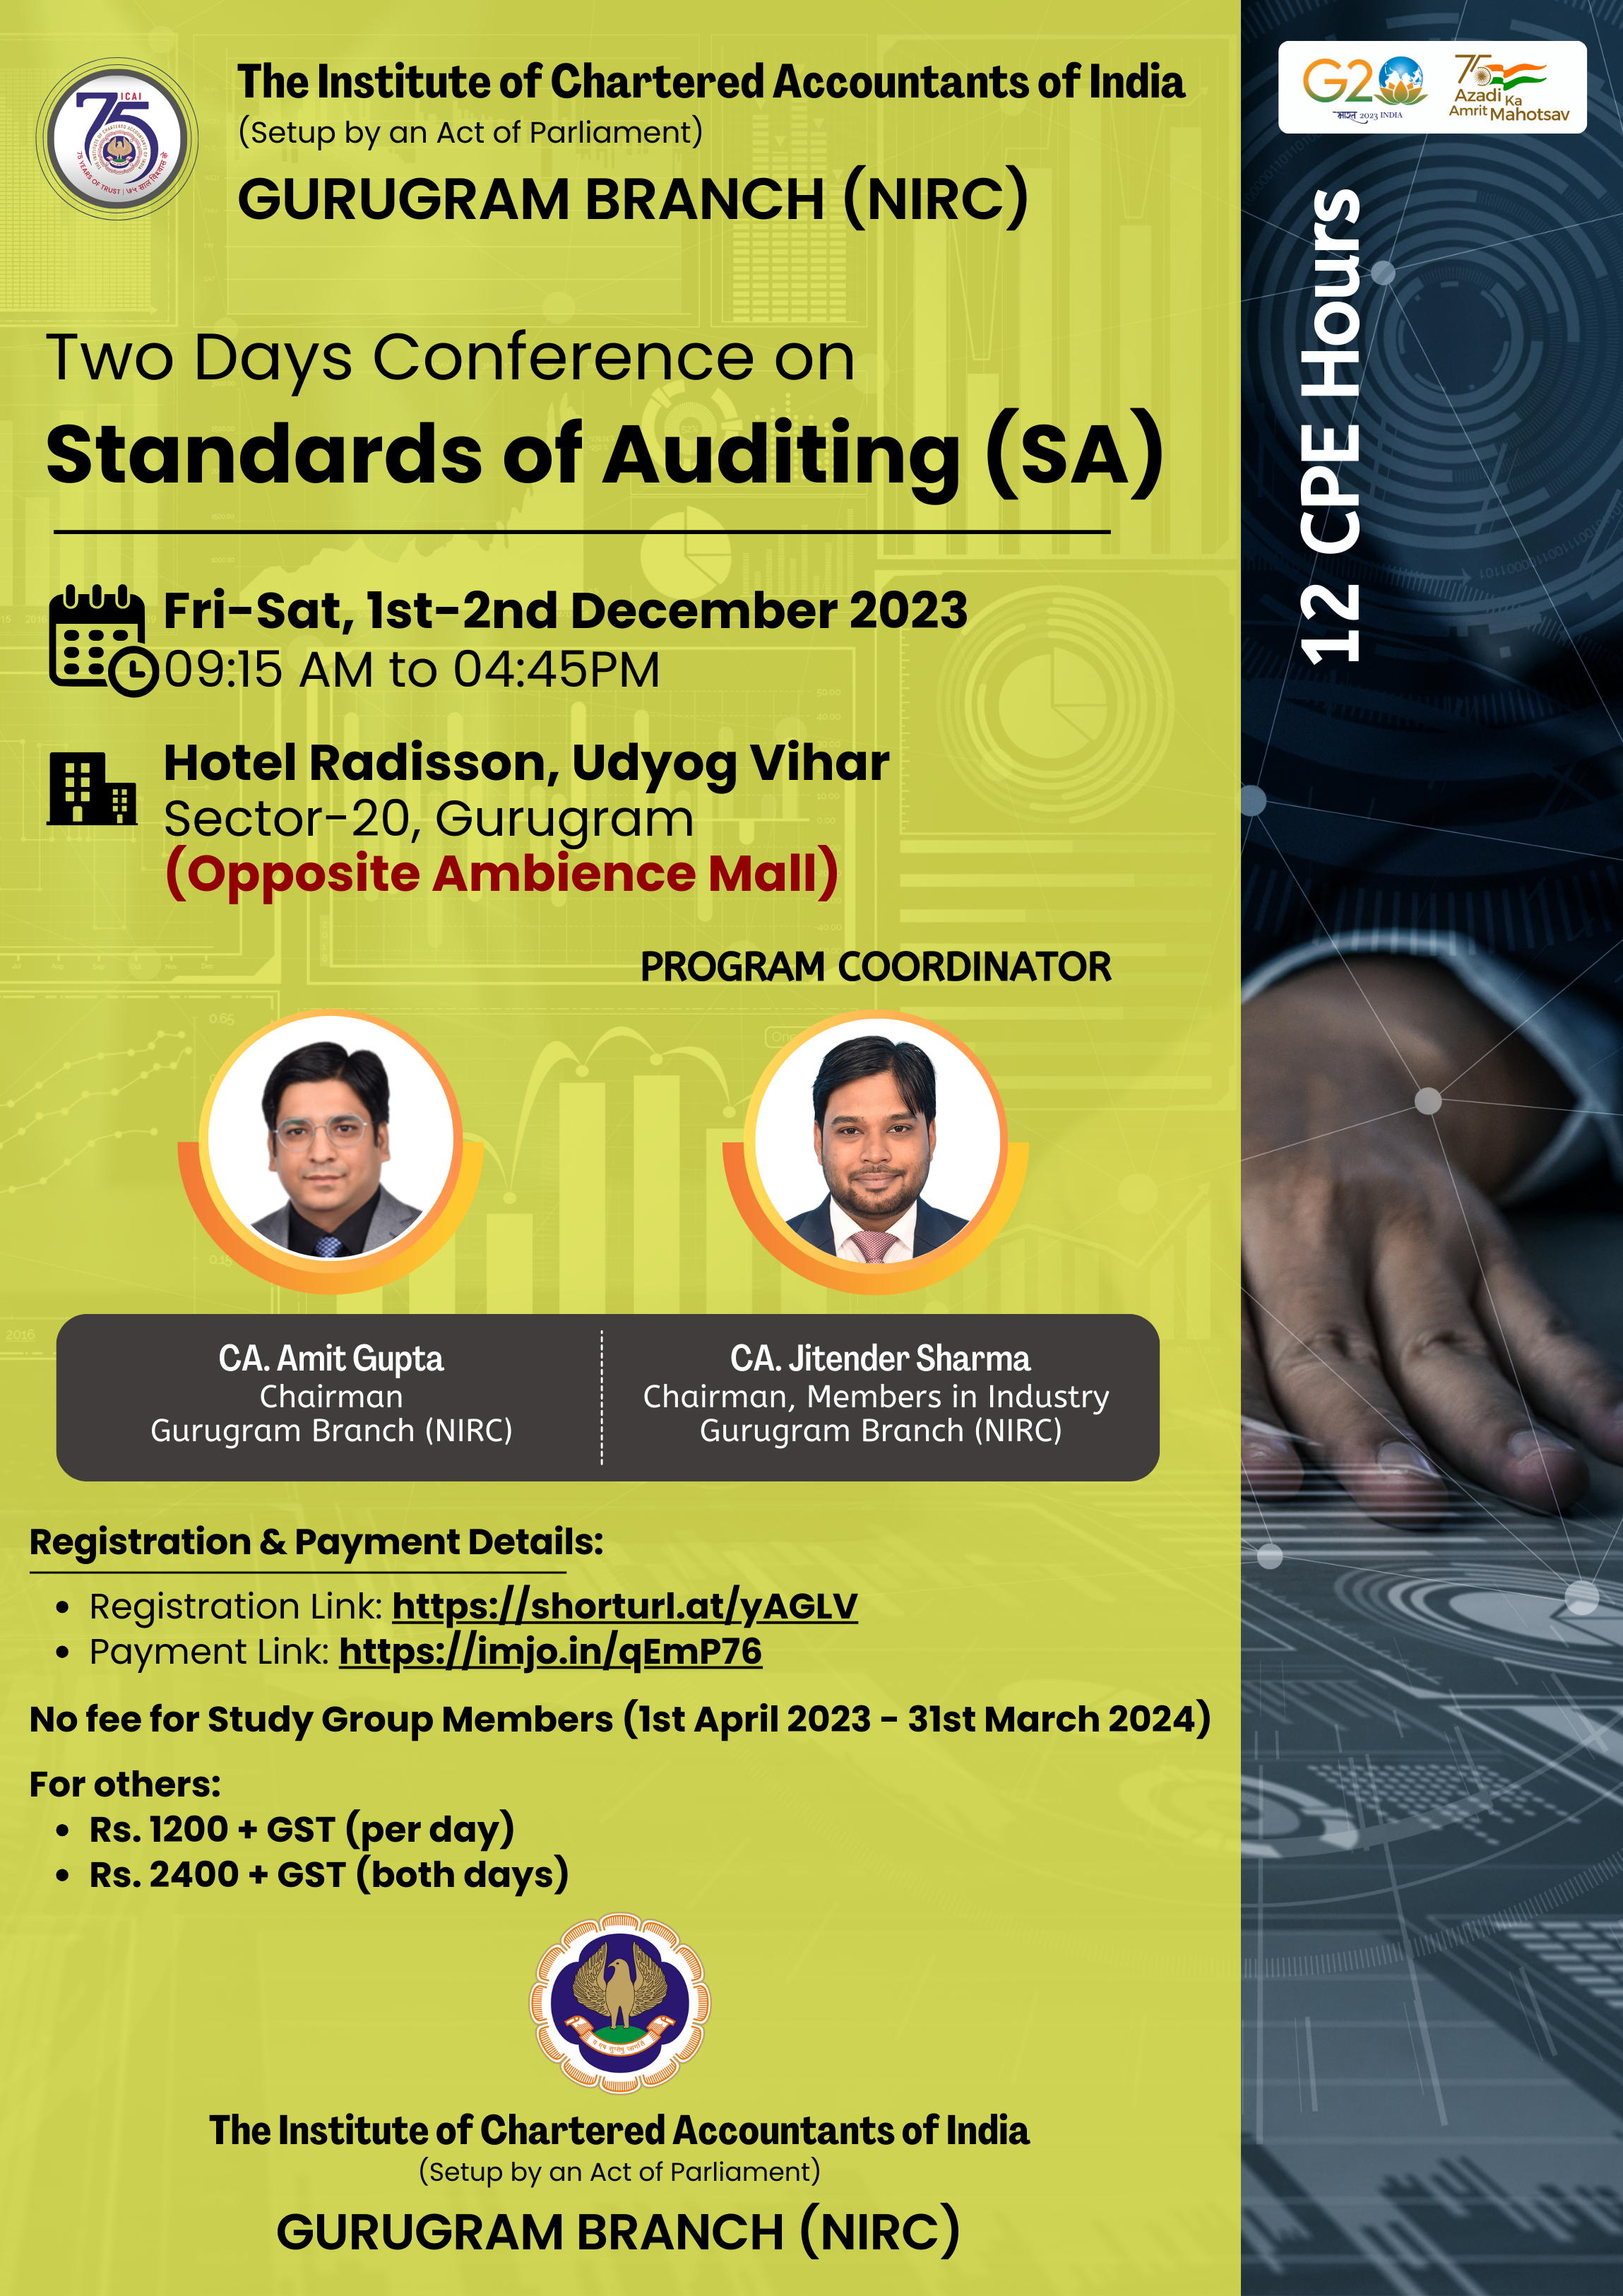 Two Days Conference on Standards of Auditing (SA)